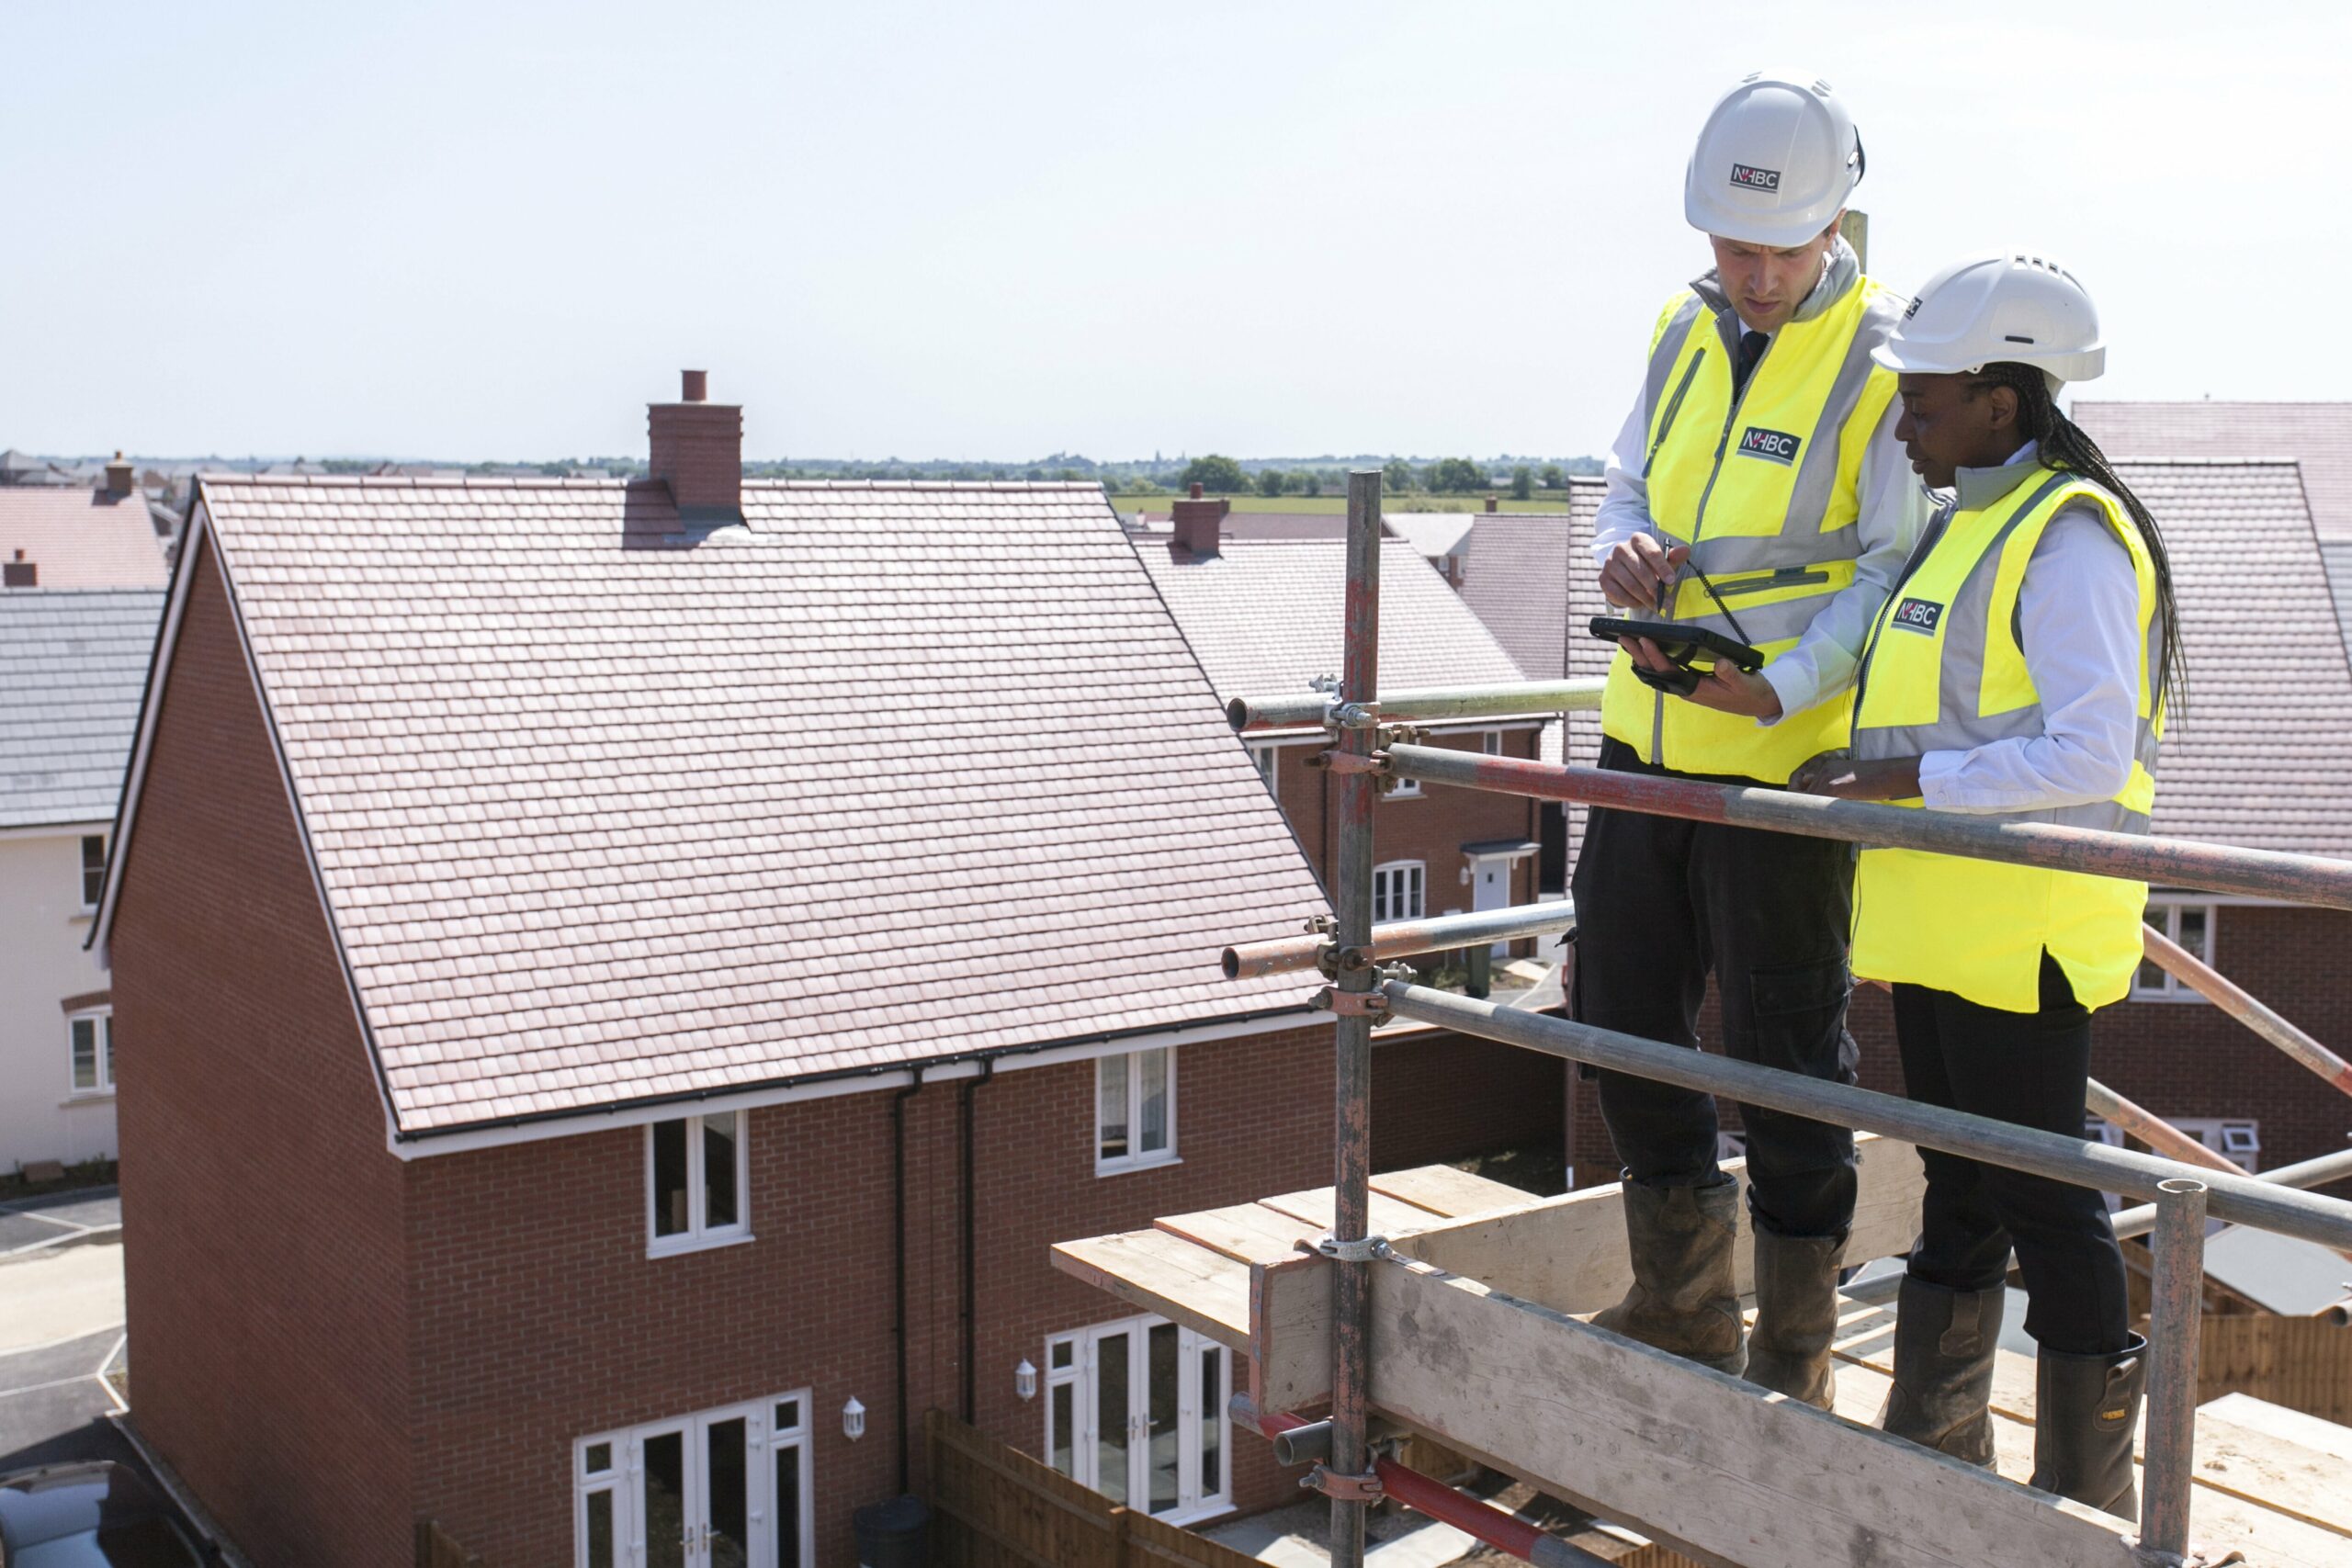 Quarterly fall masks return to confidence in house building sector, reports NHBC